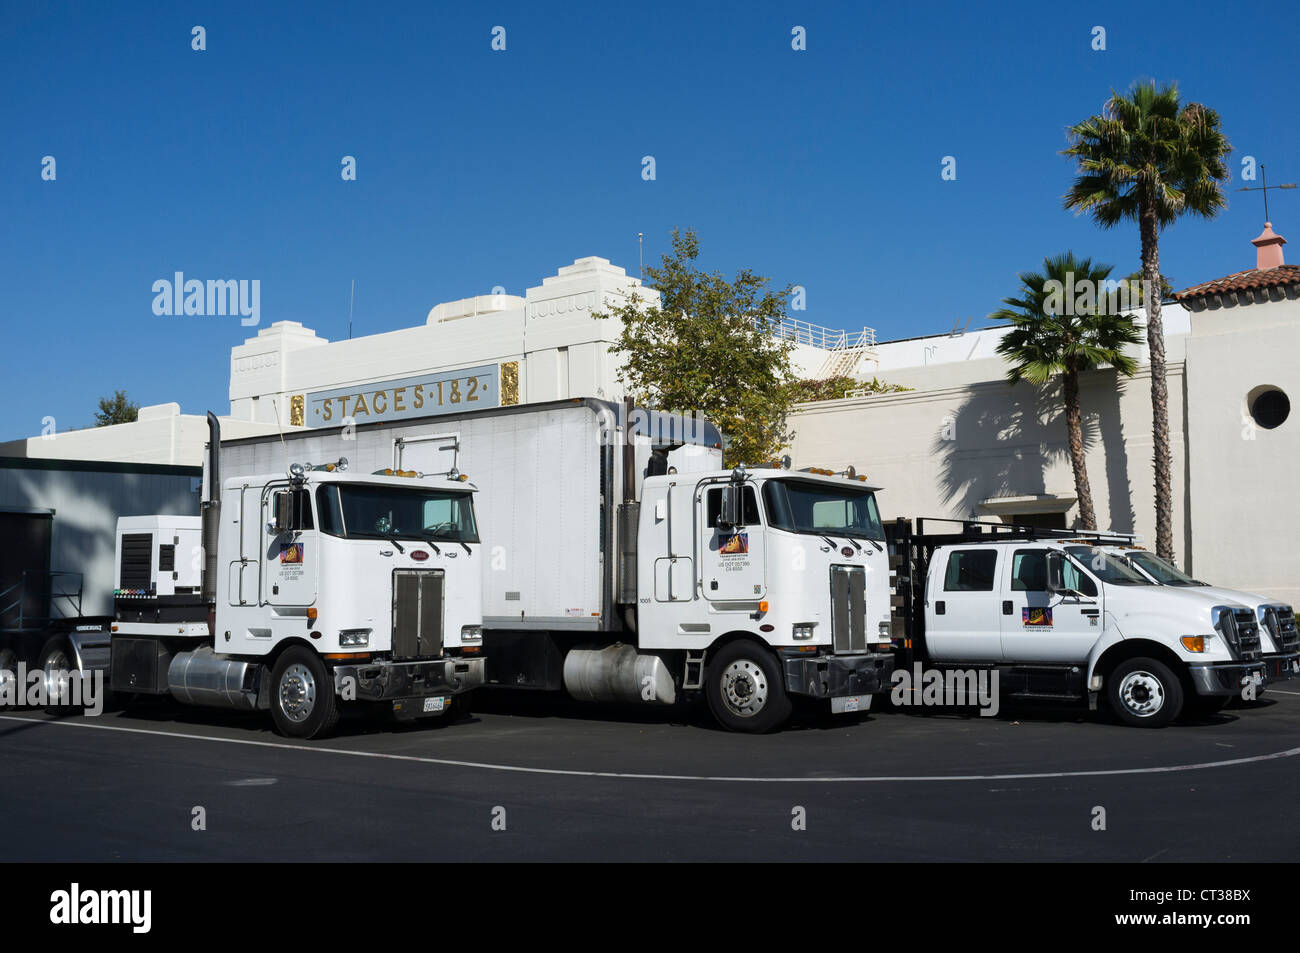 A row of 20th century fox lorries lined up in front of stages 1 & 2 in the fox lot Stock Photo